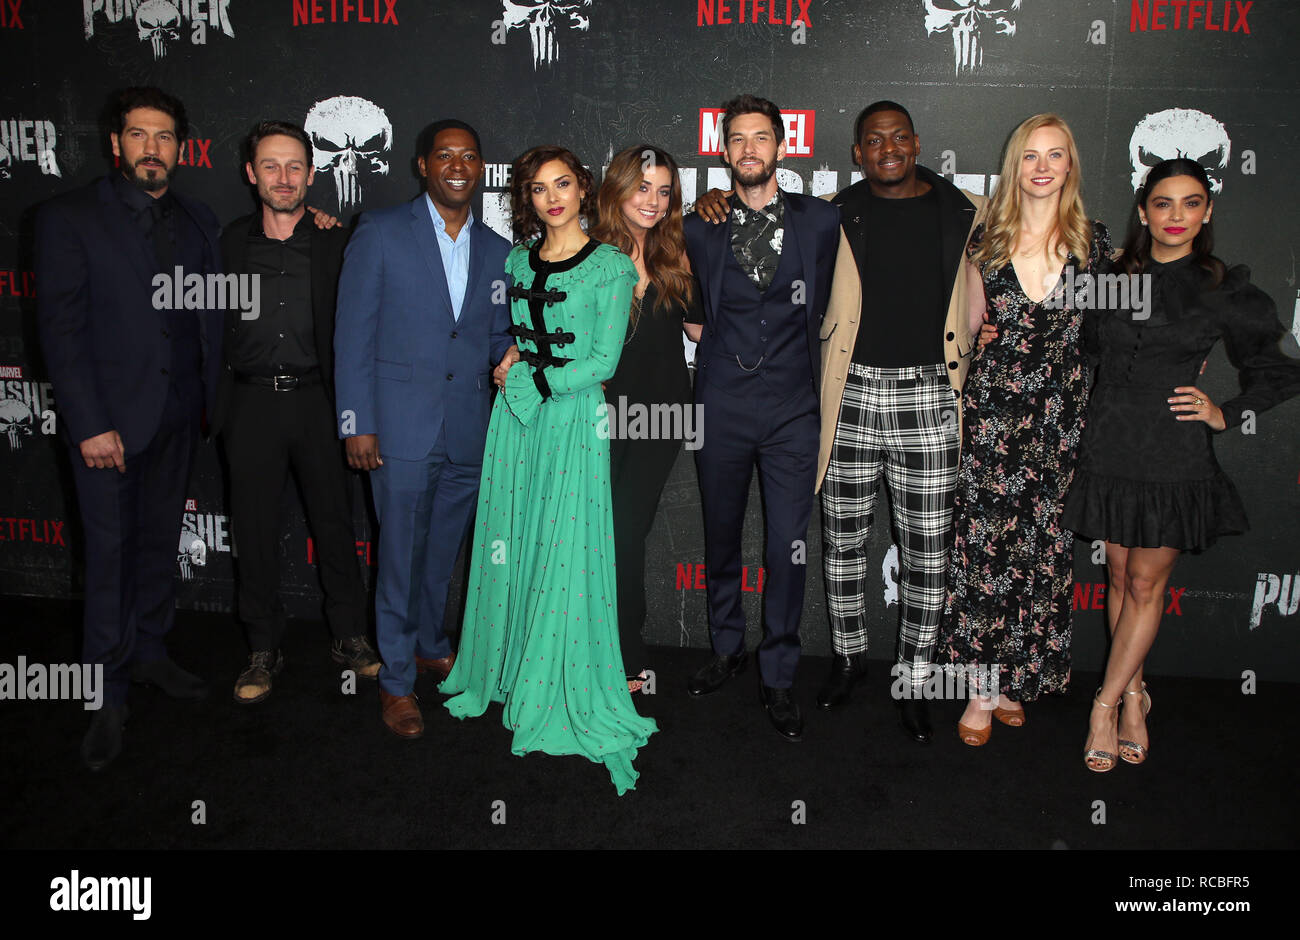 Hollywood, Ca. 14th Jan, 2019. Josh Stewart, Royce Johnson, Amber Rose Revah, Giorgia Whigham, Jon Bernthal, Ben Barnes, Jason R. Moore, Deborah Ann Woll, Floriana Lima, attends Marvel's 'The Punisher' Los Angeles Premiere at ArcLight Hollywood in Hollywood, California on January 14, 2019. Credit: Faye Sadou/Media Punch/Alamy Live News Stock Photo